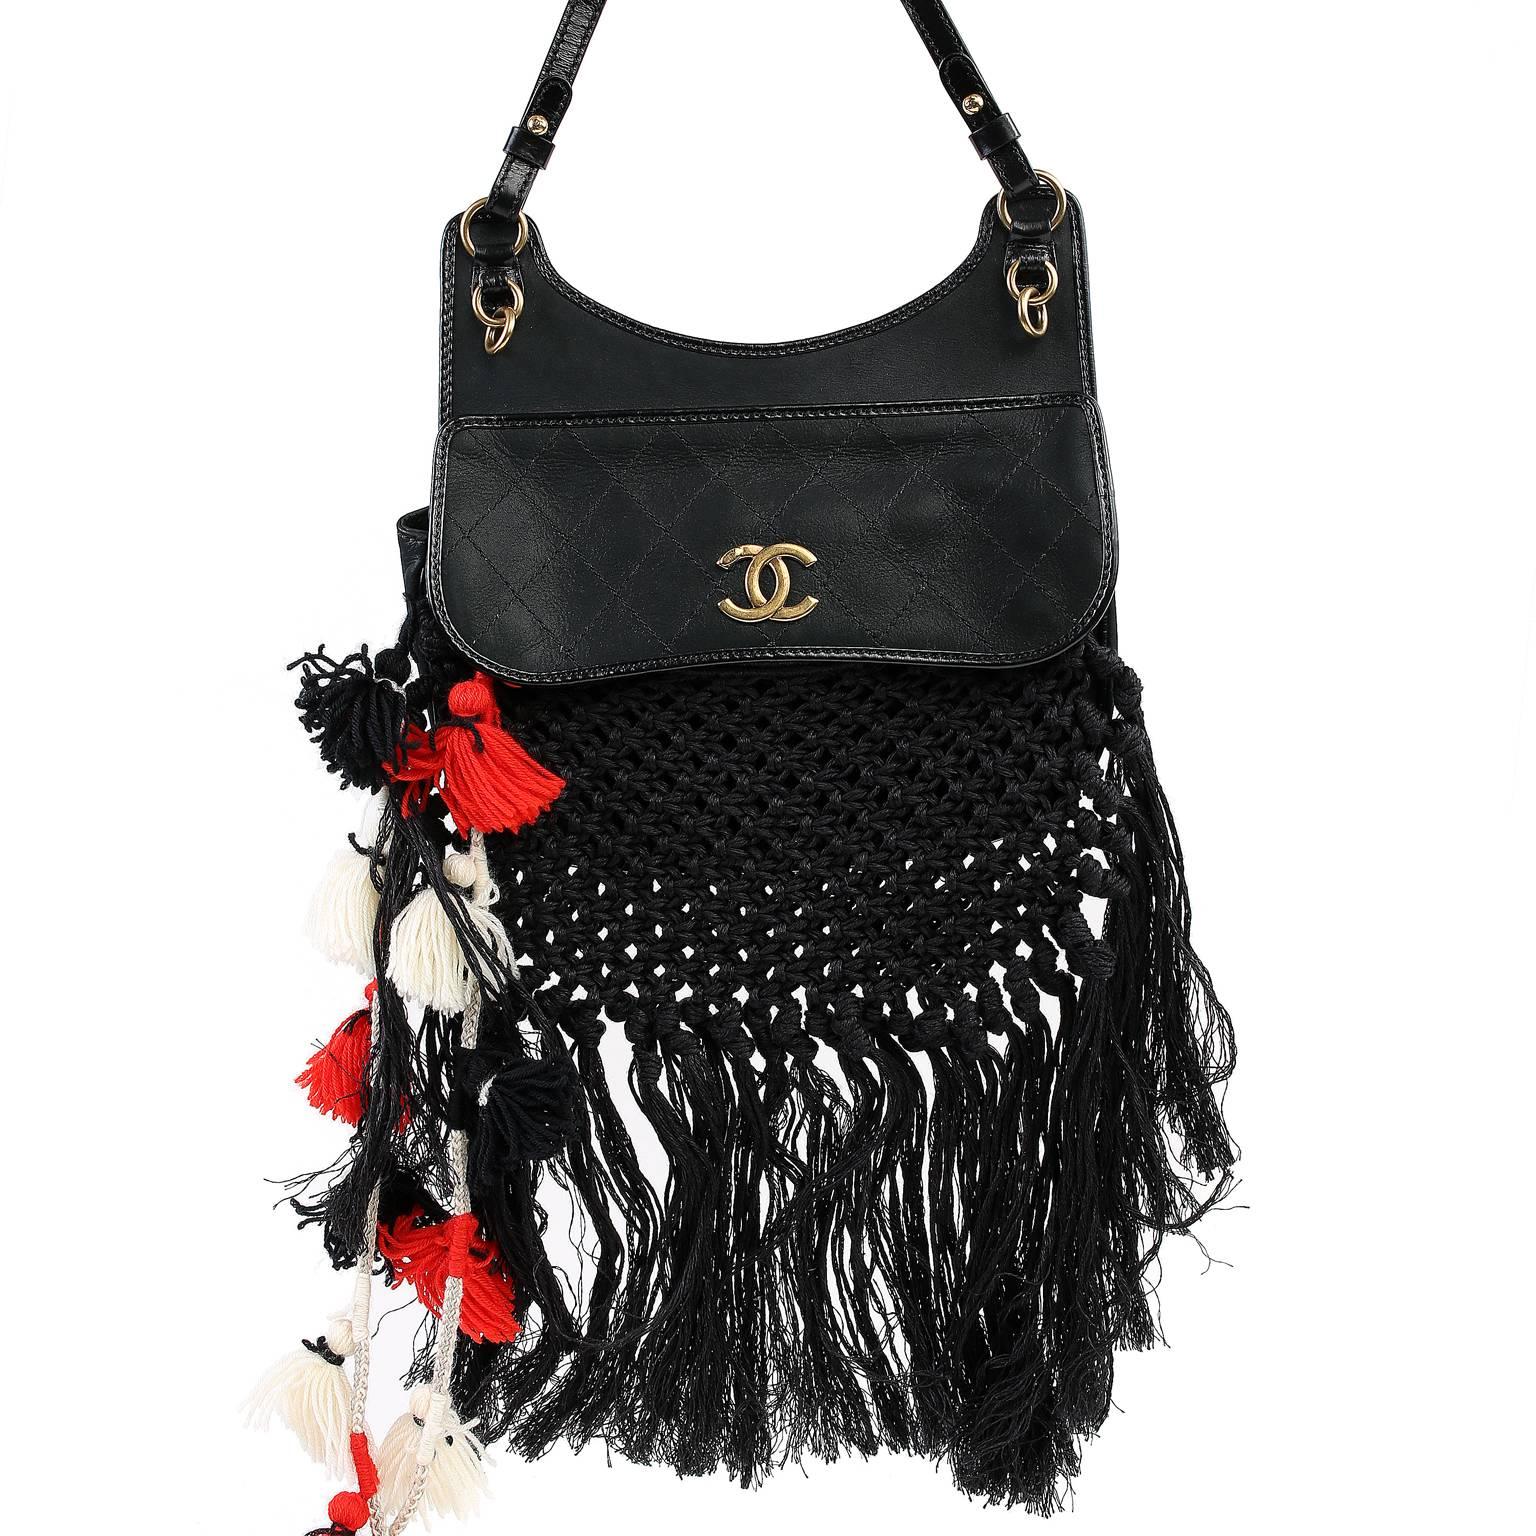 Chanel Black Bohemian Runway Bag- PRISTINE
  Free spirit accents cover this fabulous and collectible cross body.  

Black leather slim messenger silhouette has black crocheted bottom.  Red, black, white and ecru tassels dangle decoratively from